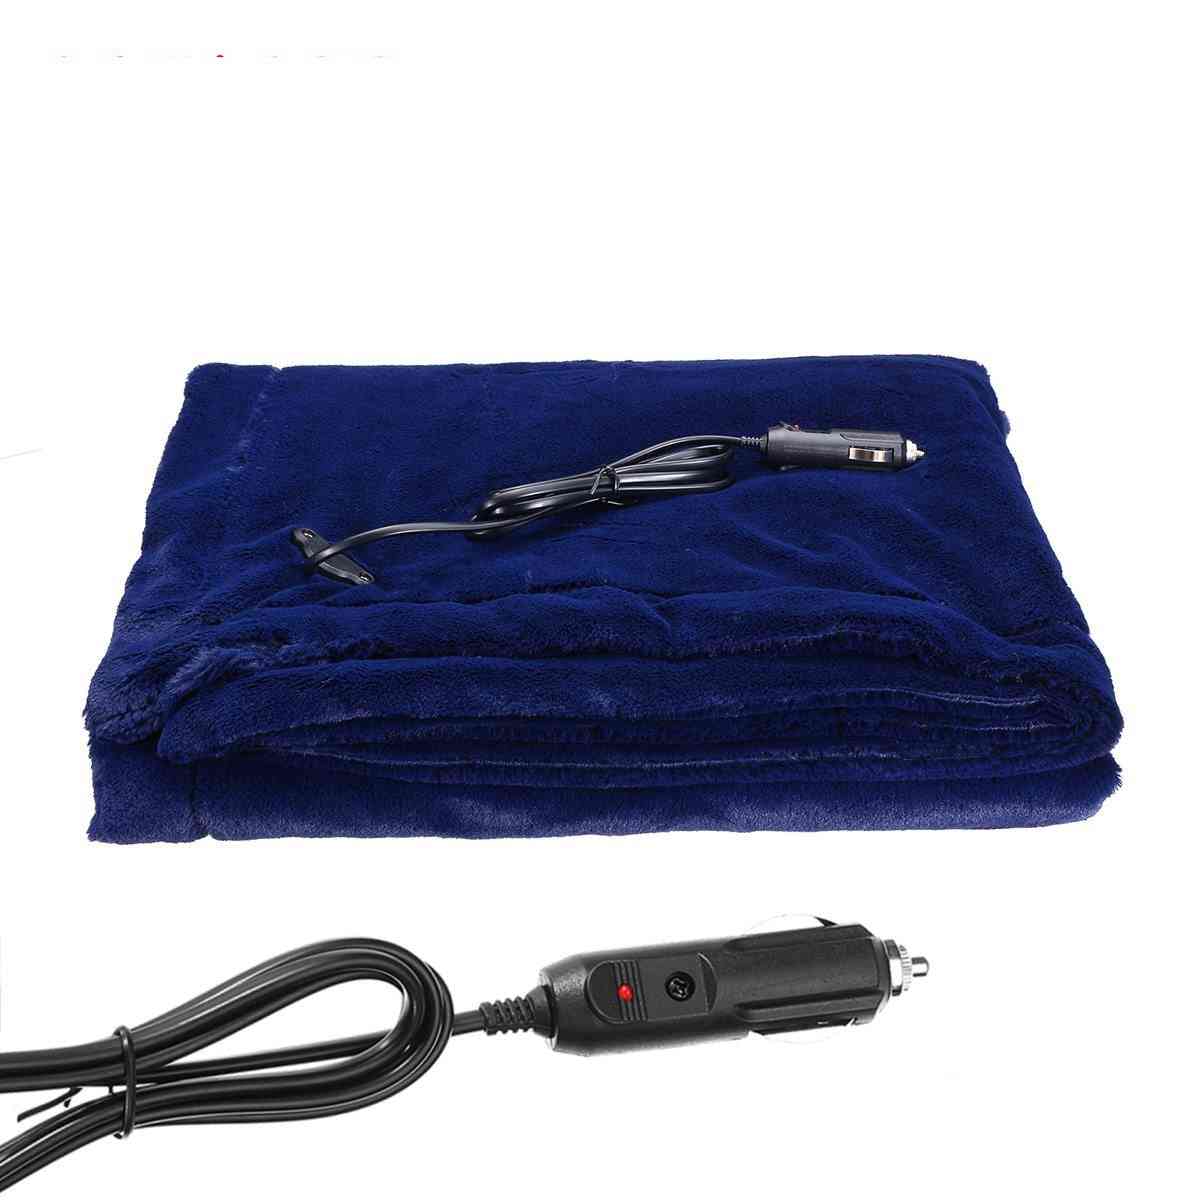 Winter Heated 12v 24v Lcd Display Warm Auto Electric Fleece Blanket For Car